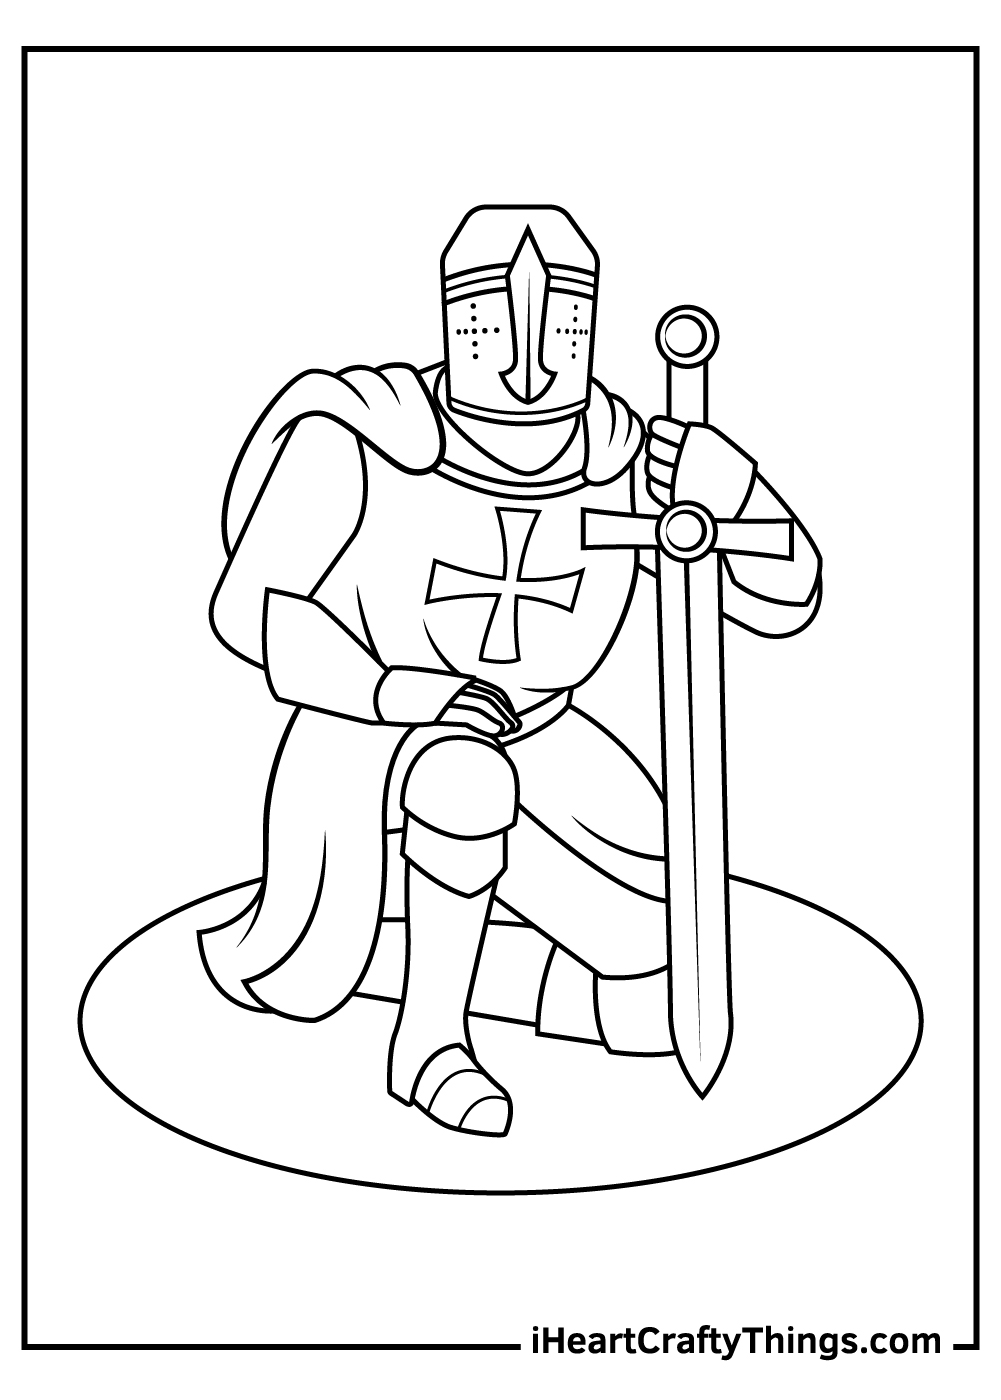 Knight coloring pages free printables